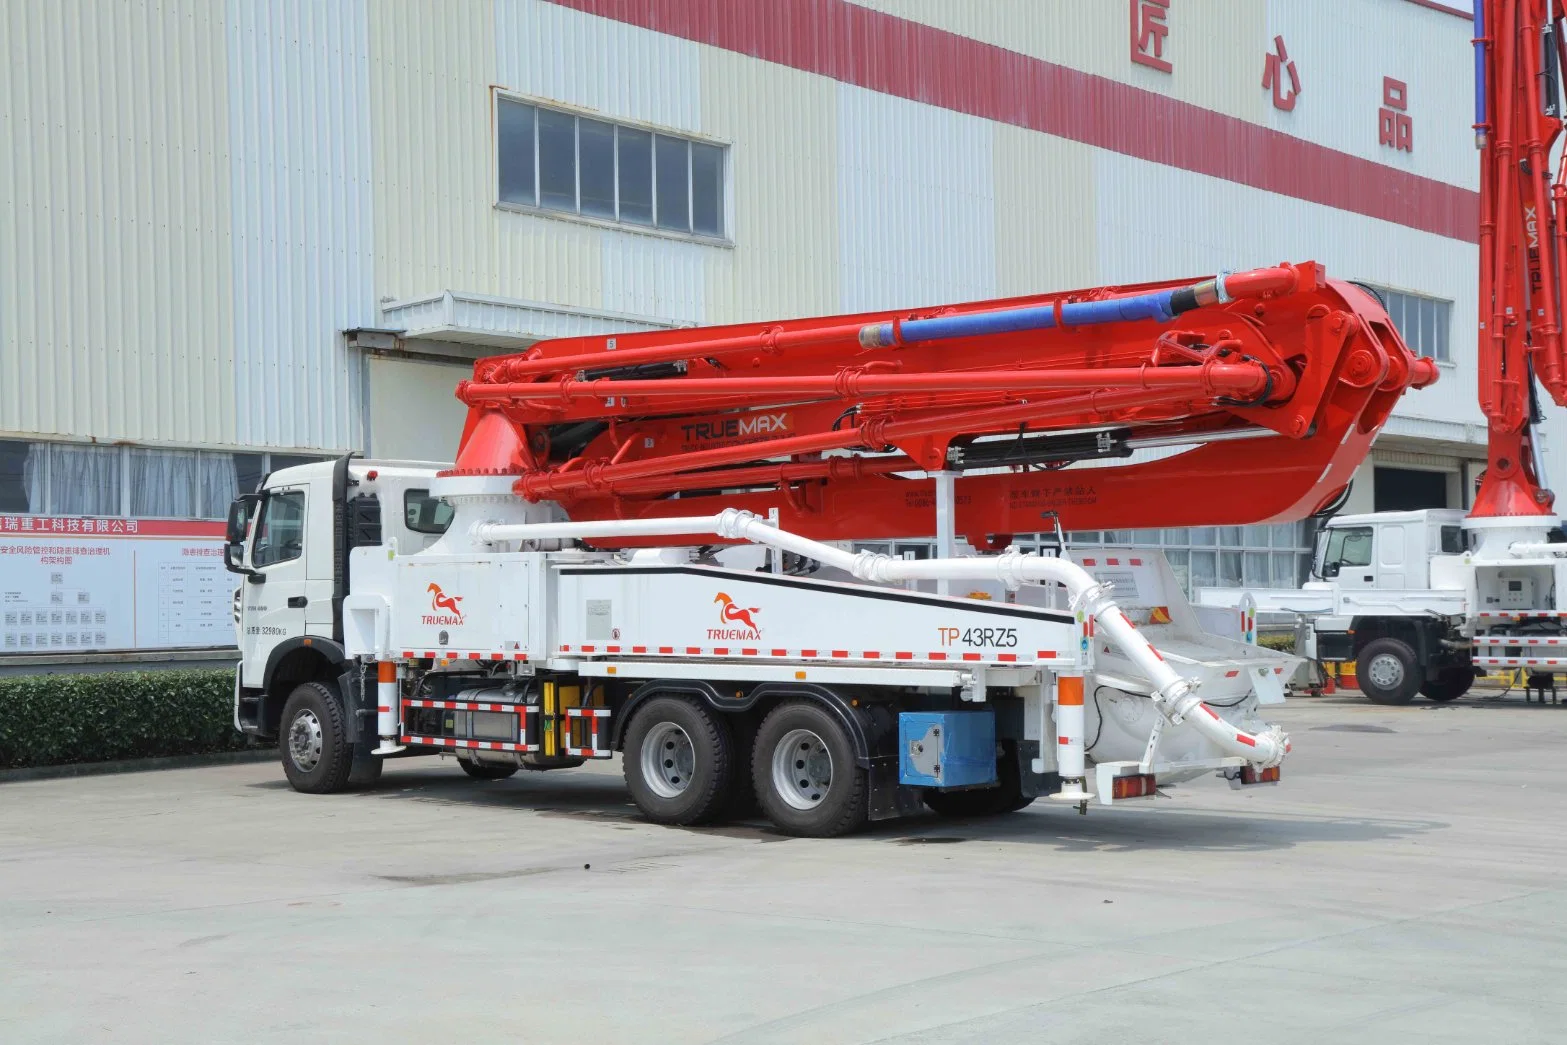 Tp43rz5 Truck Mounted Concrete Boom Pump From Truemax for Concrete Machinery